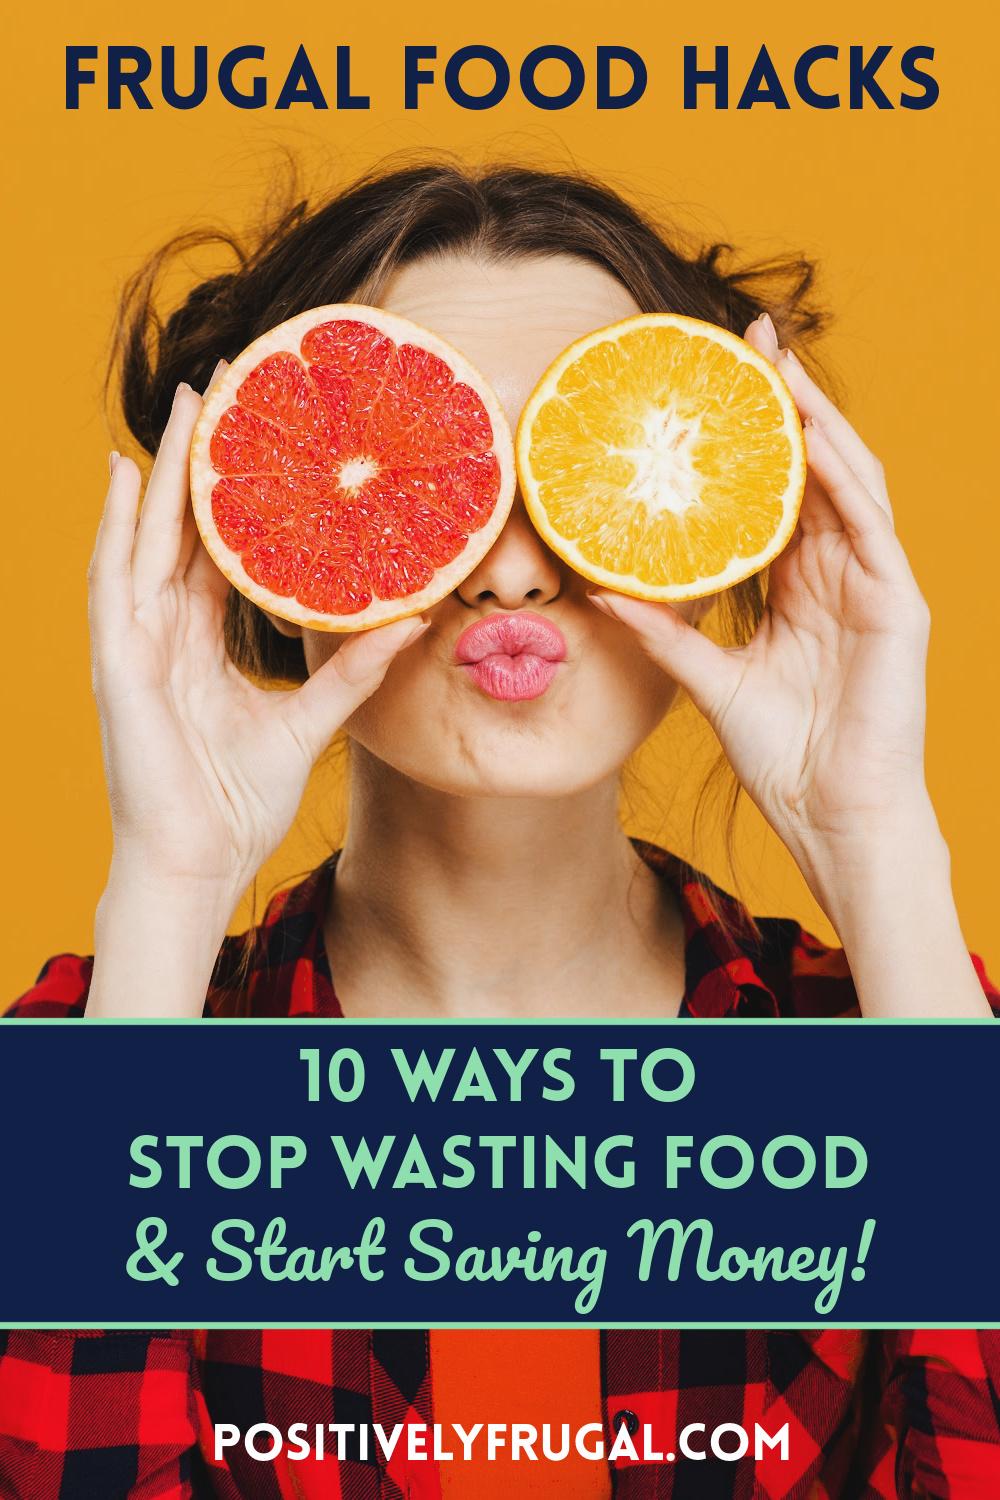 Frugal Food Hacks 10 Ways to Staop Wasting Food and Start Saving Money by PositivelyFrugal.com